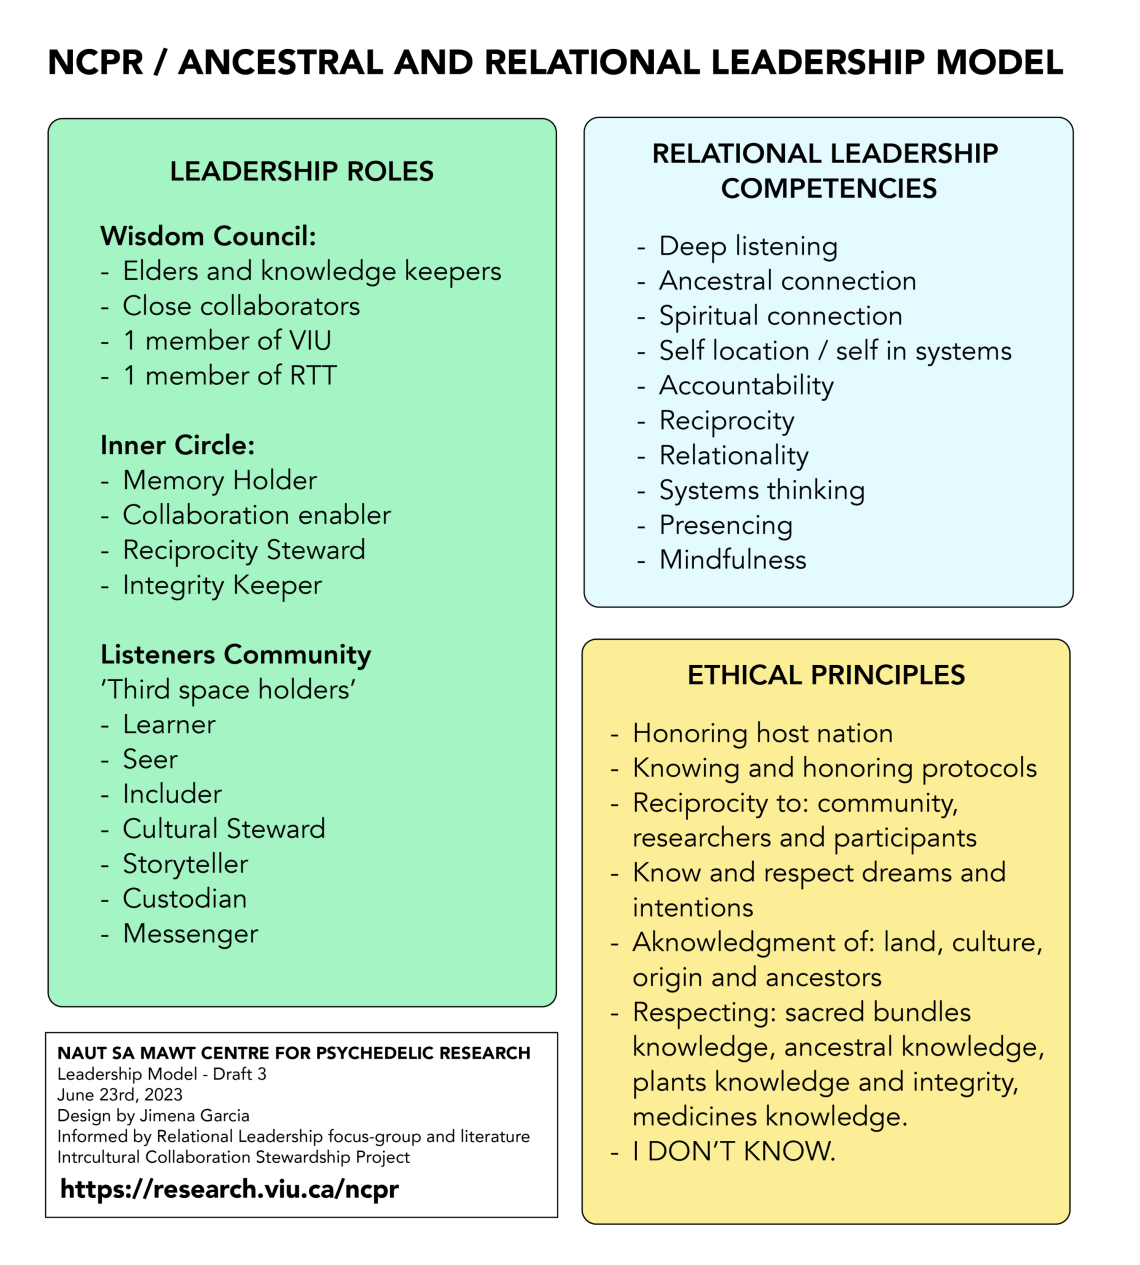 Relational Leadership roles and competencies